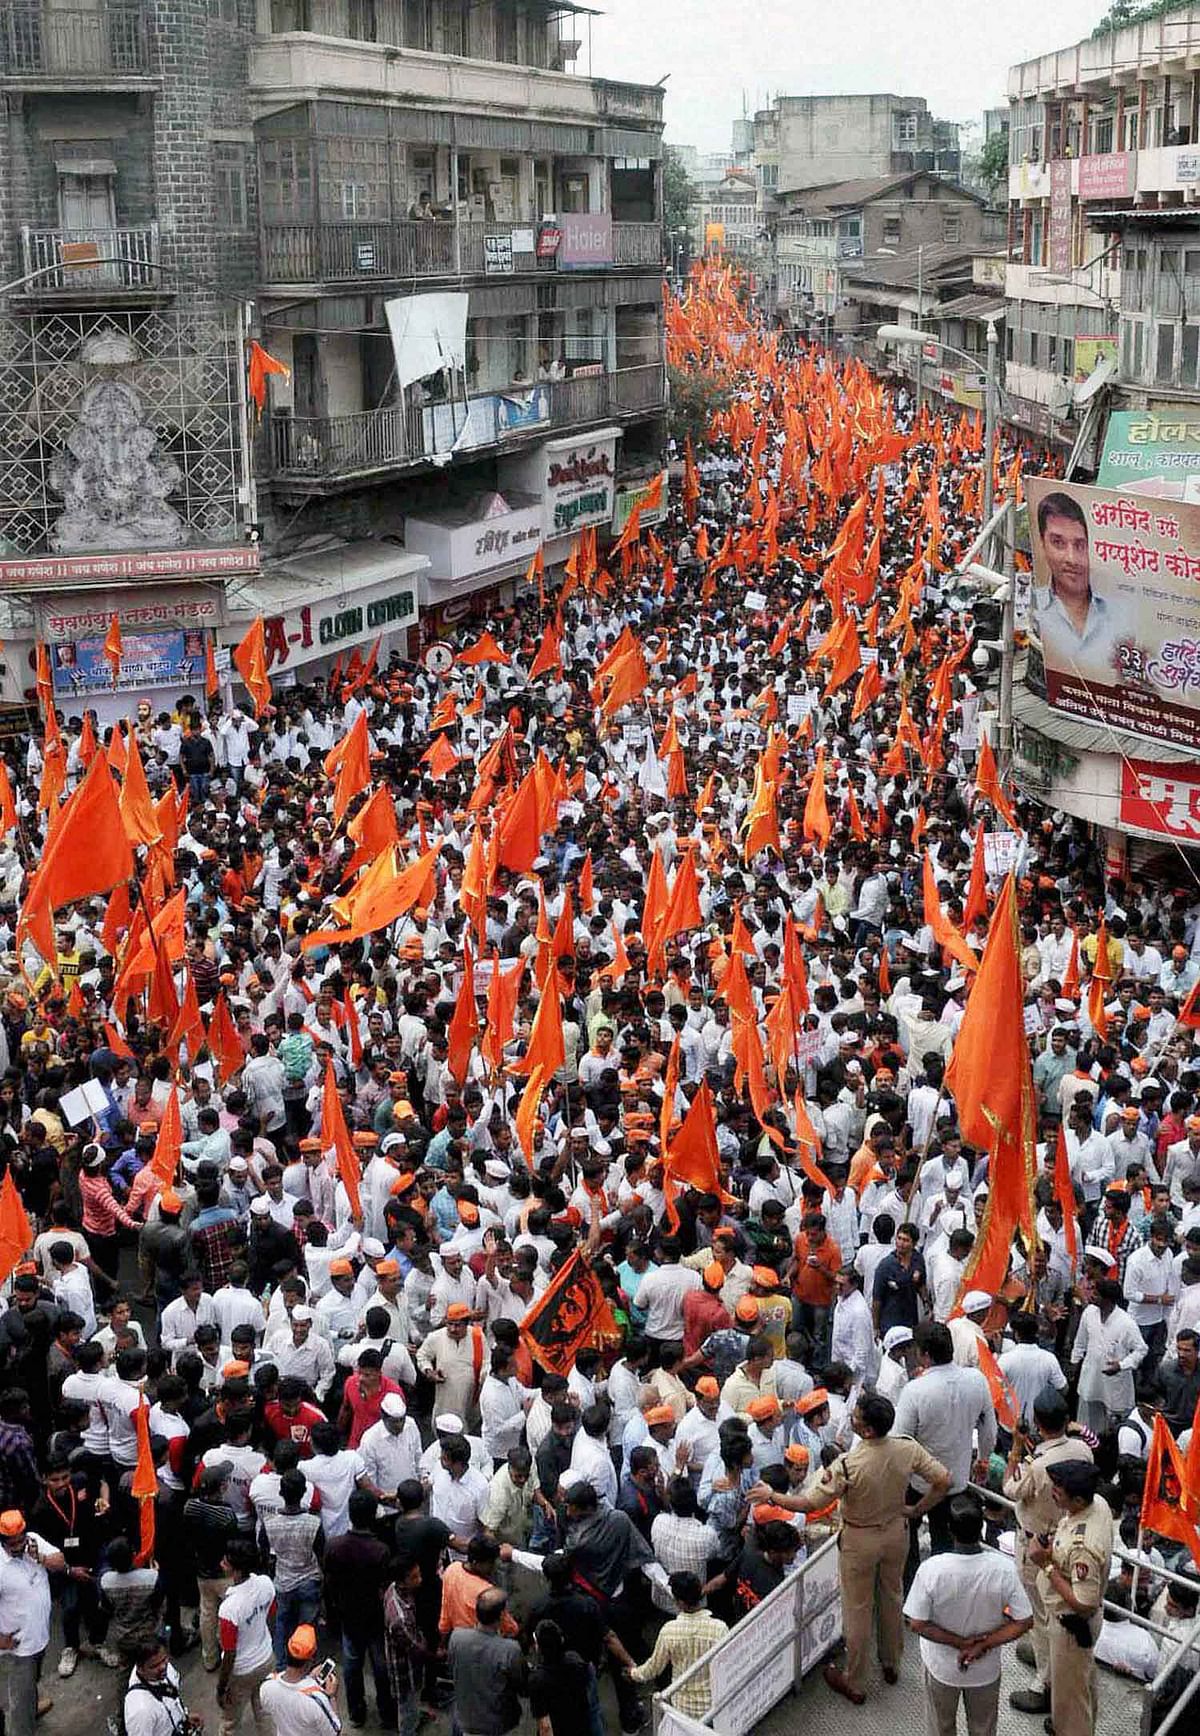 The Maratha community has been carrying out silent, non-violent protests across the state with increasing numbers.